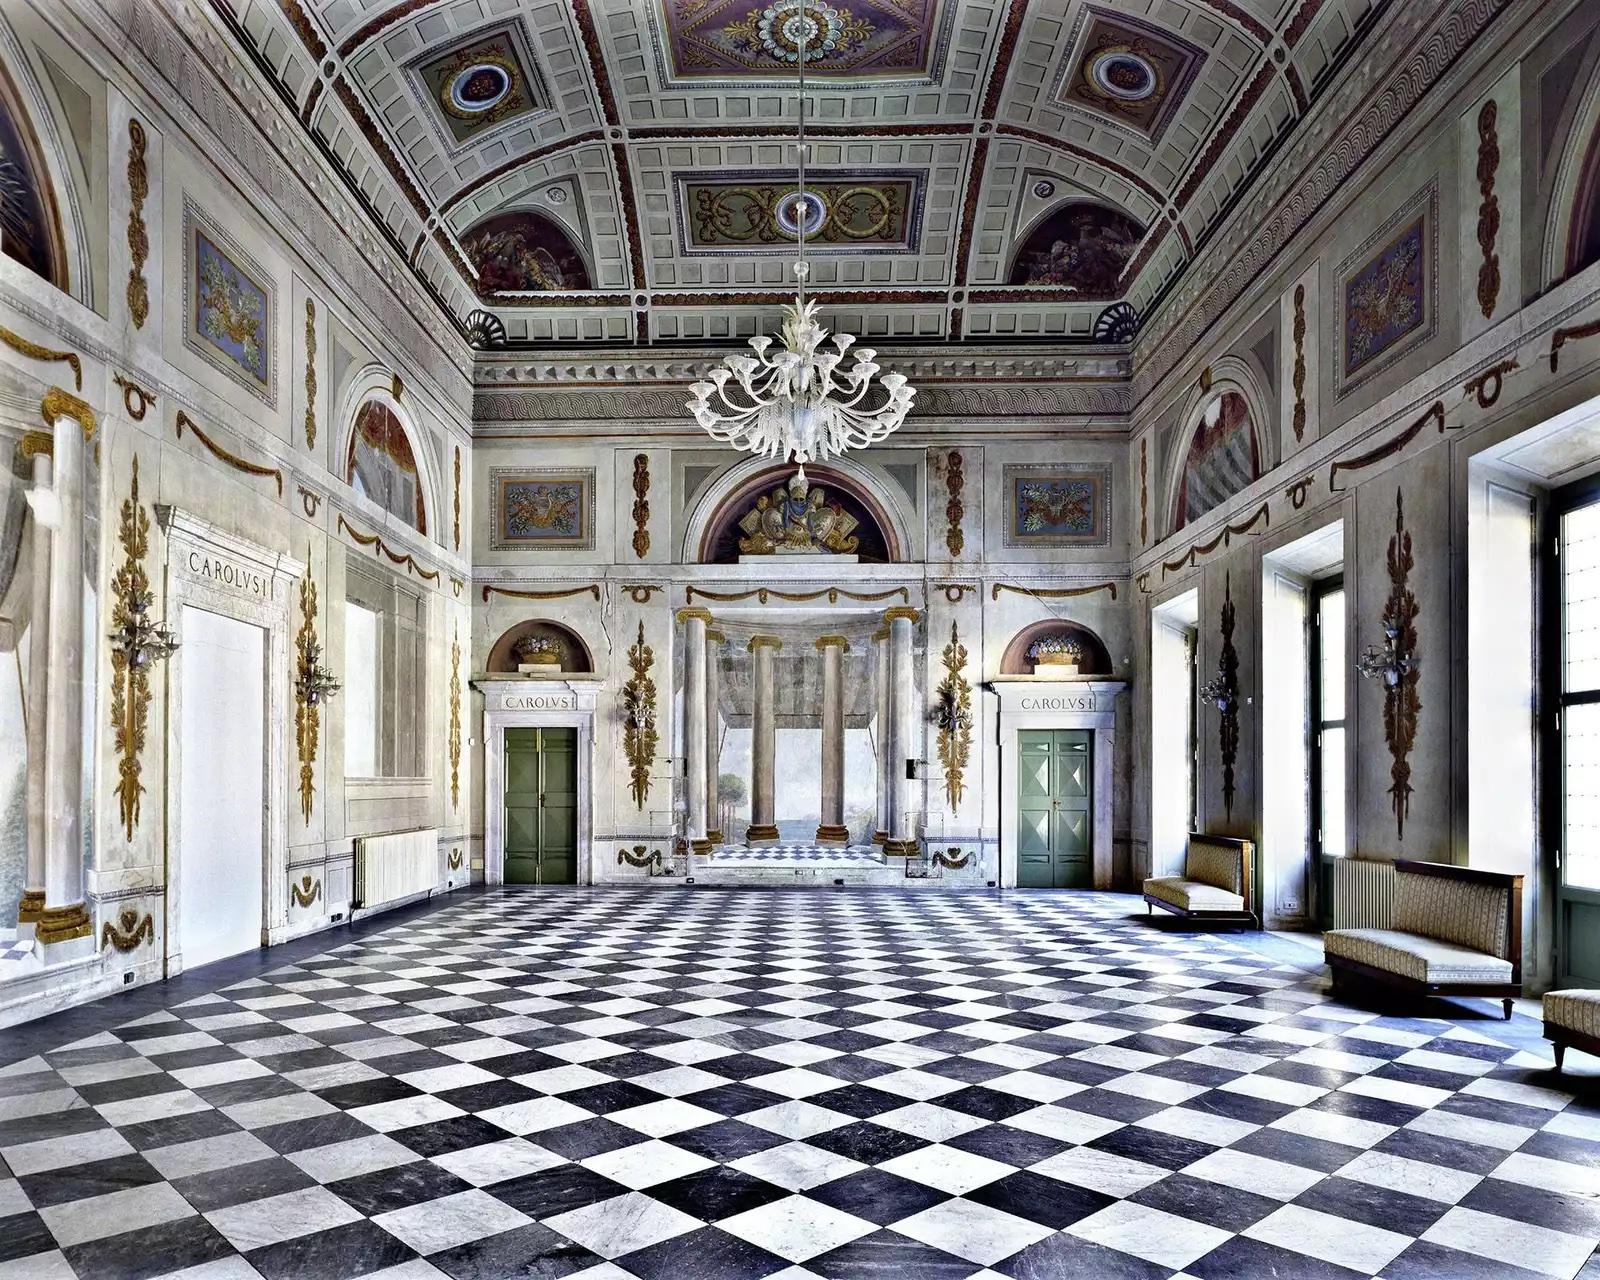 Palazzo Ducale, Massa, Italy, 1999
Chromogenic print
120 x 150 cm
Edition of 5

Italian, b. 1954, Florence, Italy, based in Florence, Italy Massimo Listri travels his native Italy and the world with his camera, photographing grand interior spaces